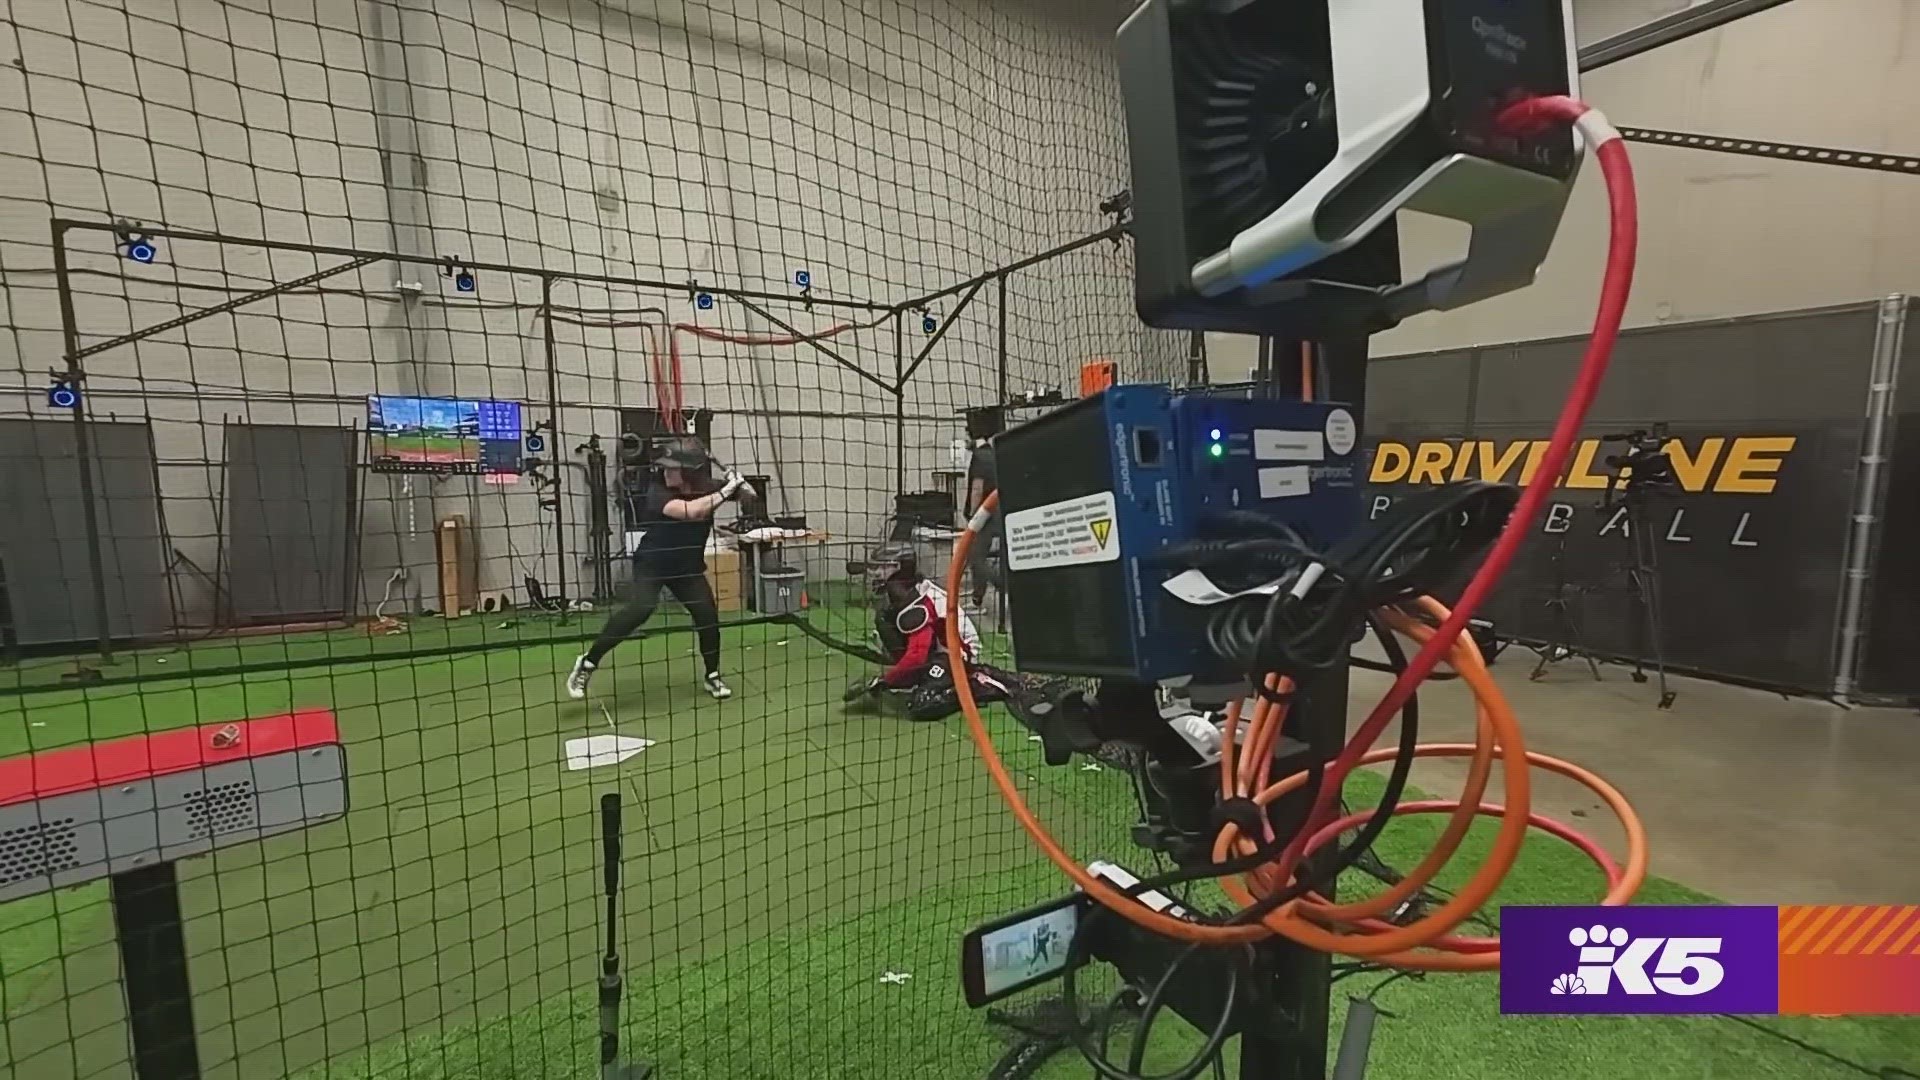 10% of MLB players have used the training facility since it opened in 2009. #k5evening